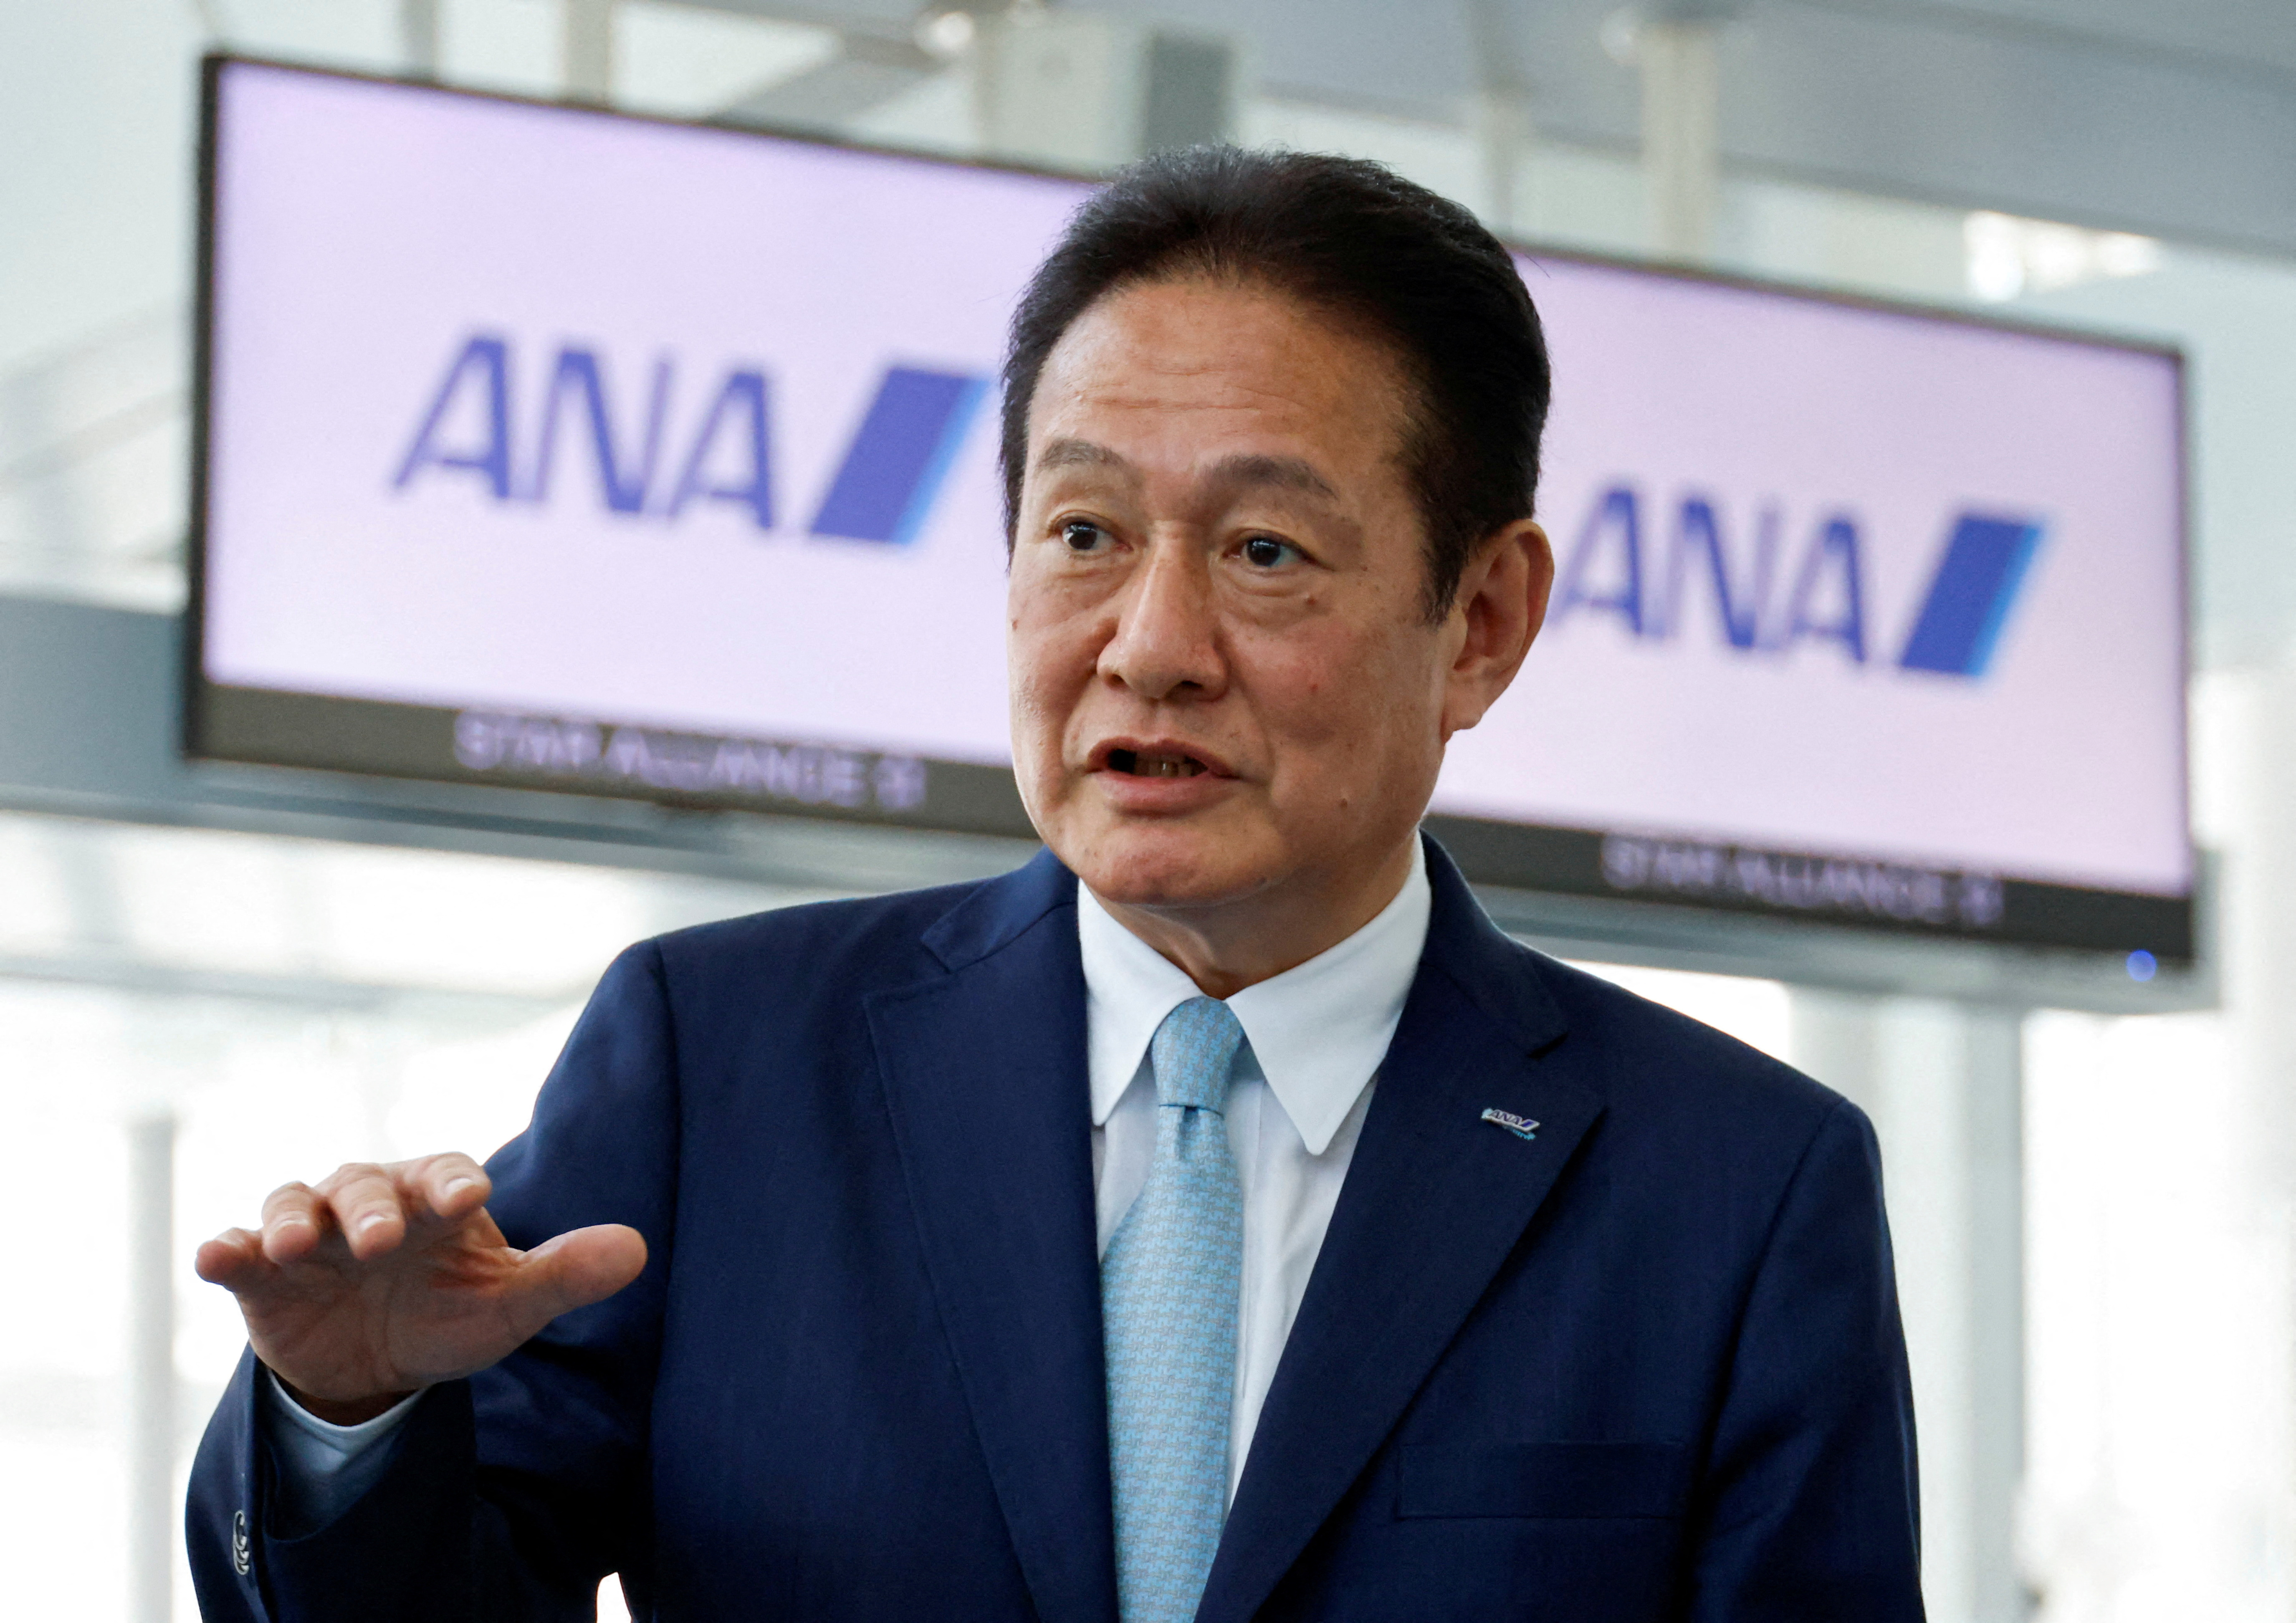 All Nippon Airways President and CEO Shinichi Inoue speaks to media at Haneda Airport in Tokyo